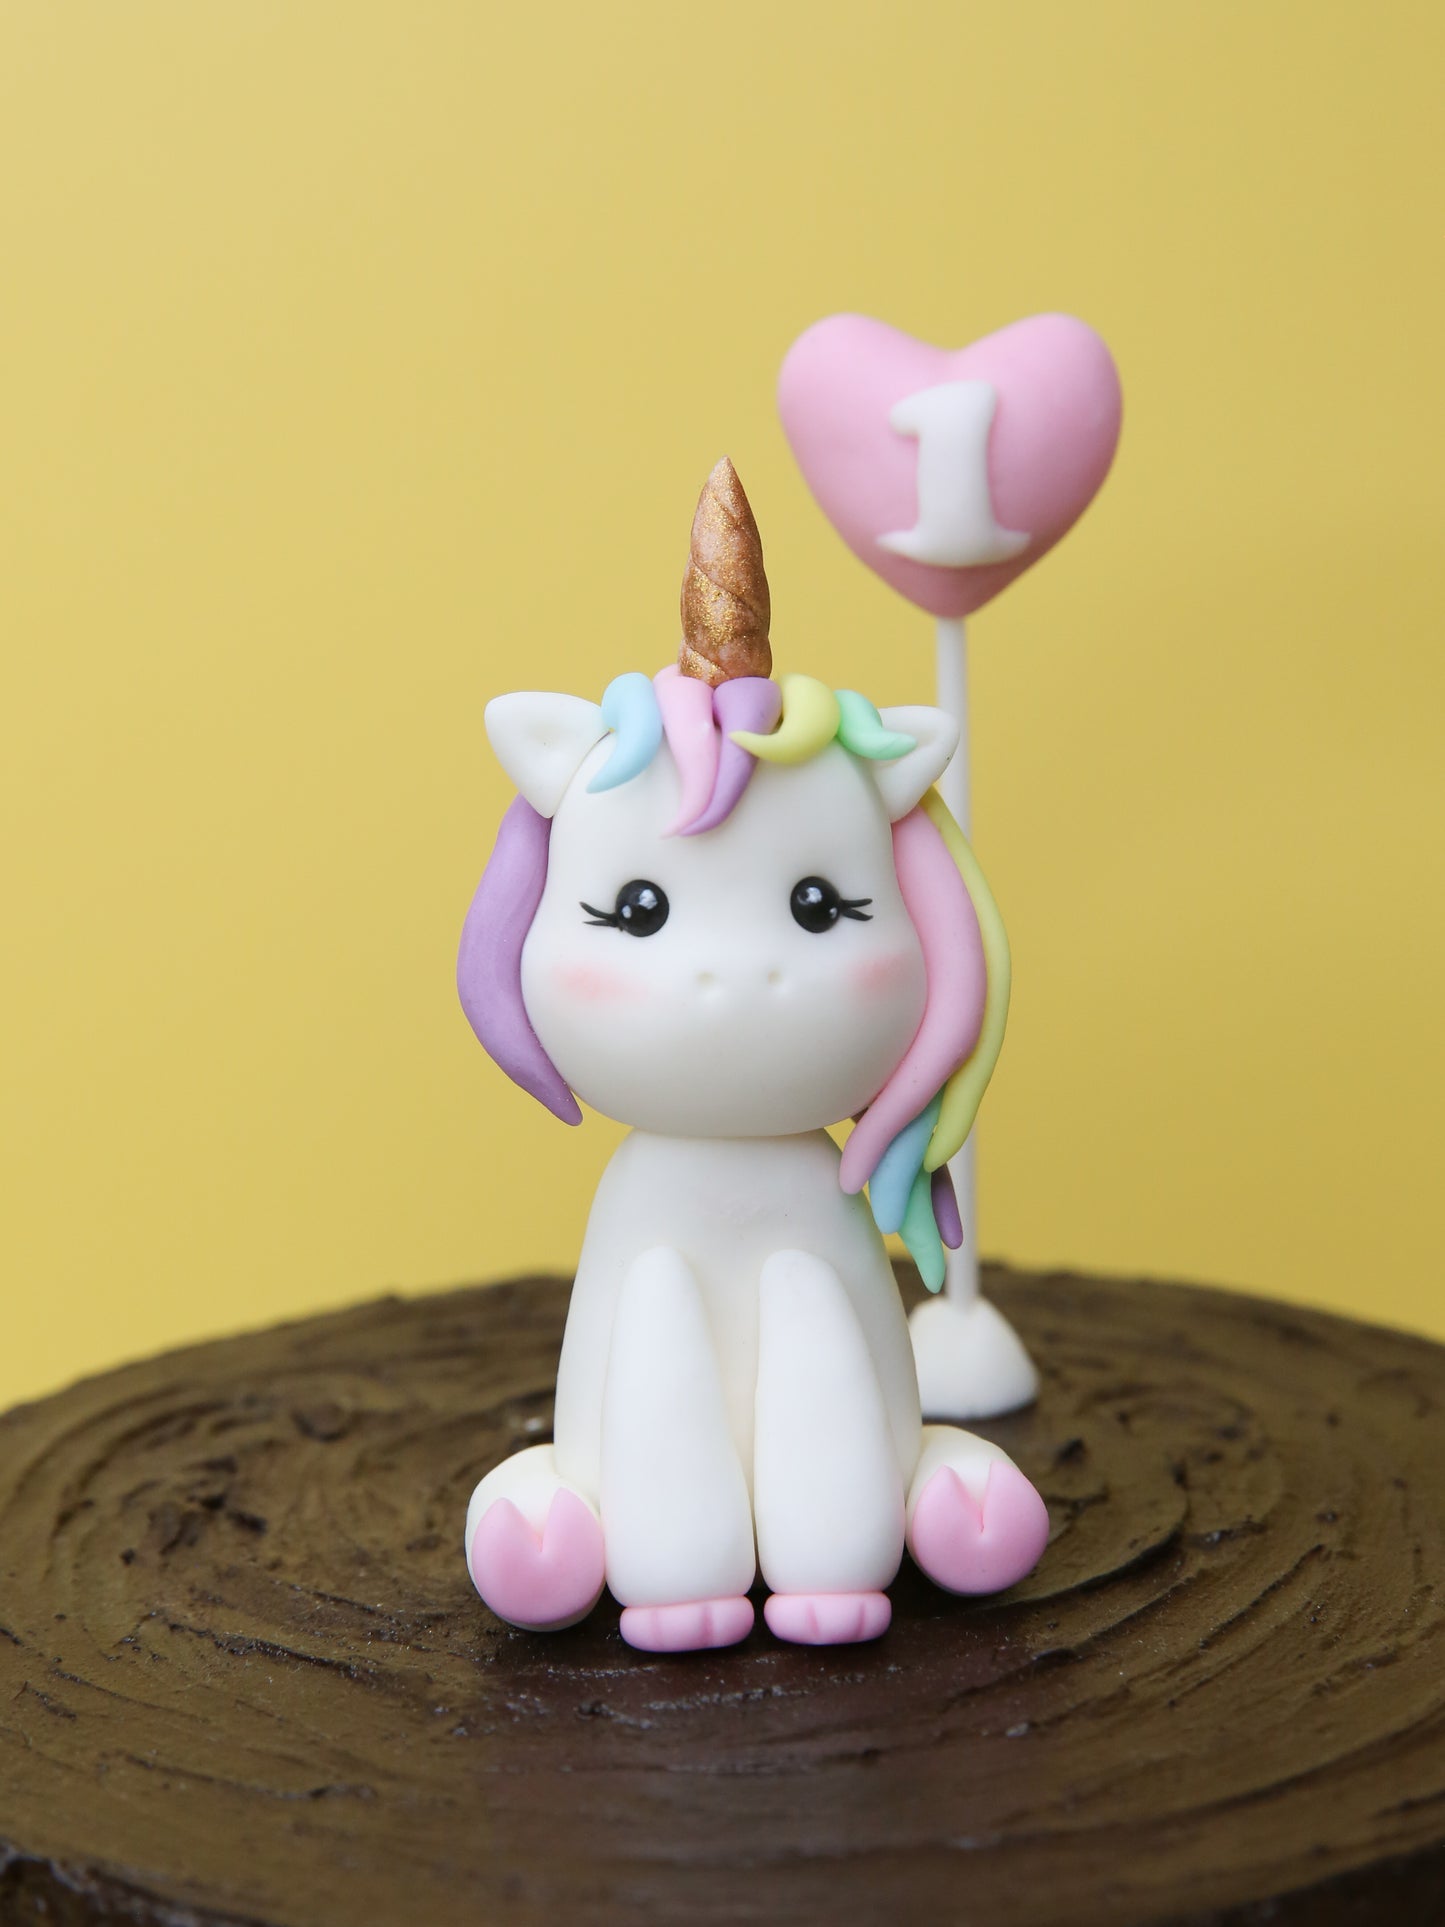 Cute Unicorn Cake Topper Fondant with Personalised Number, Name Tag, and Decorations